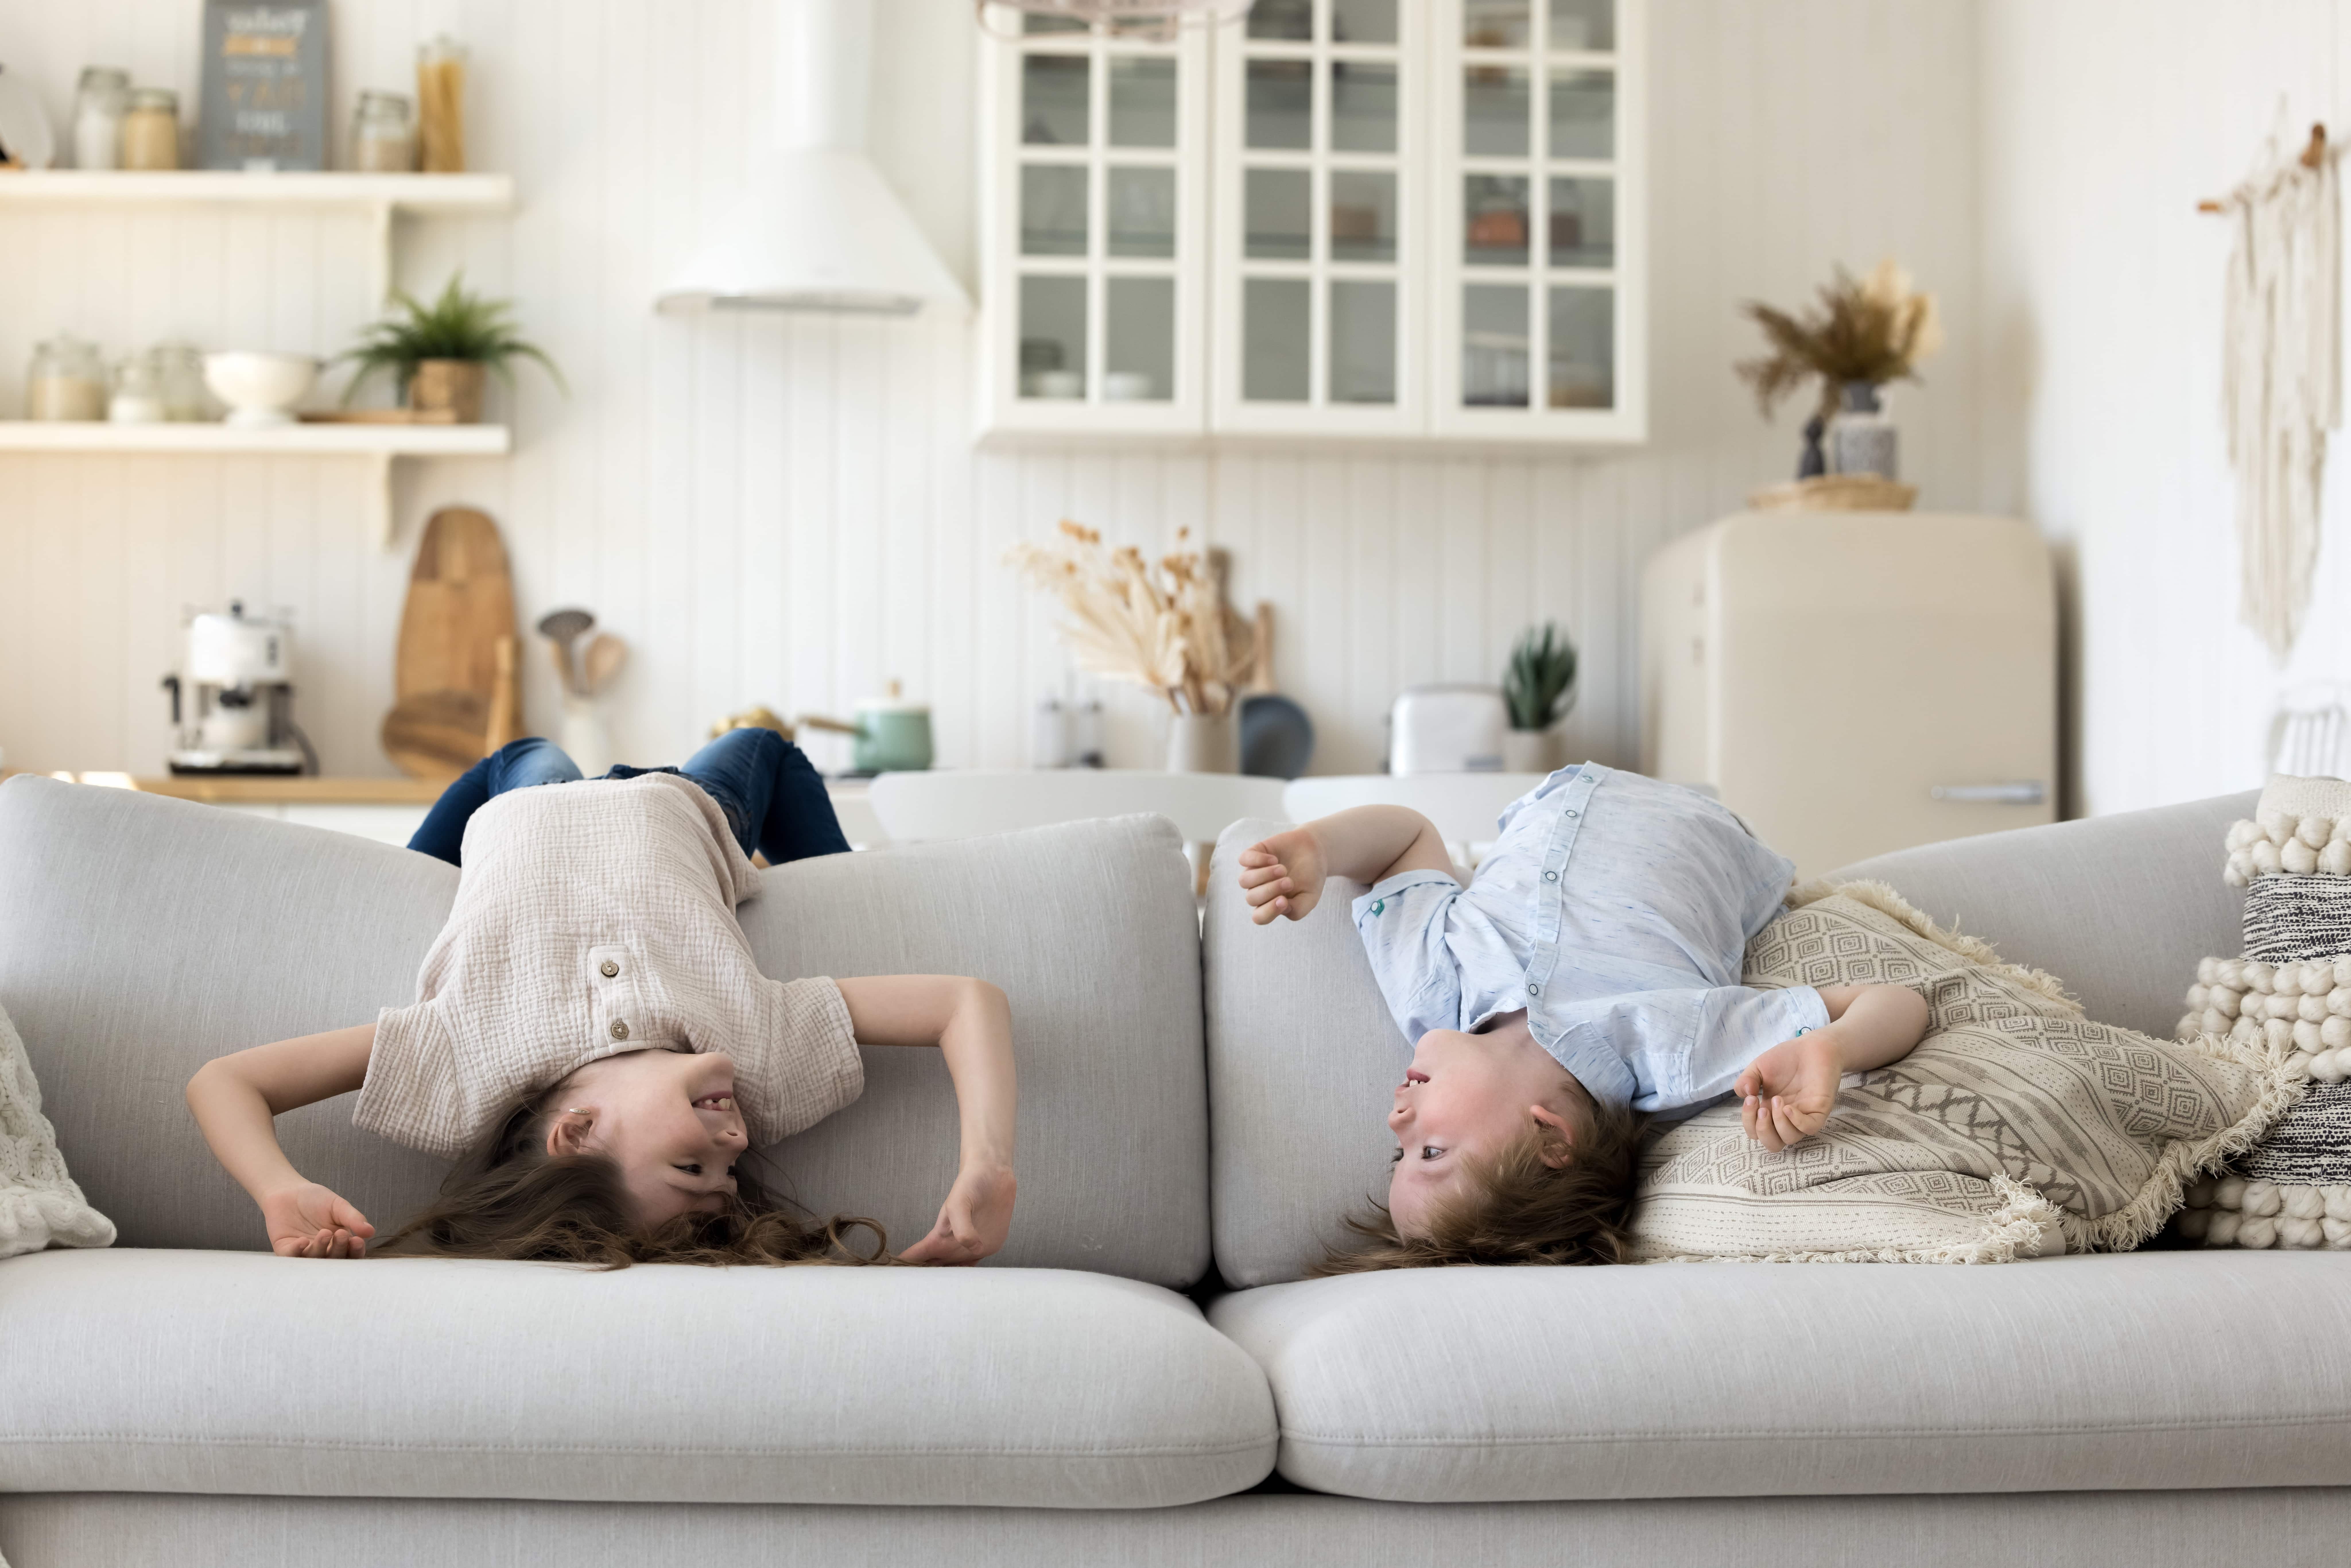 Two happy children upside down on a couch. To symbolise the outcome of learning how to co parent successfully